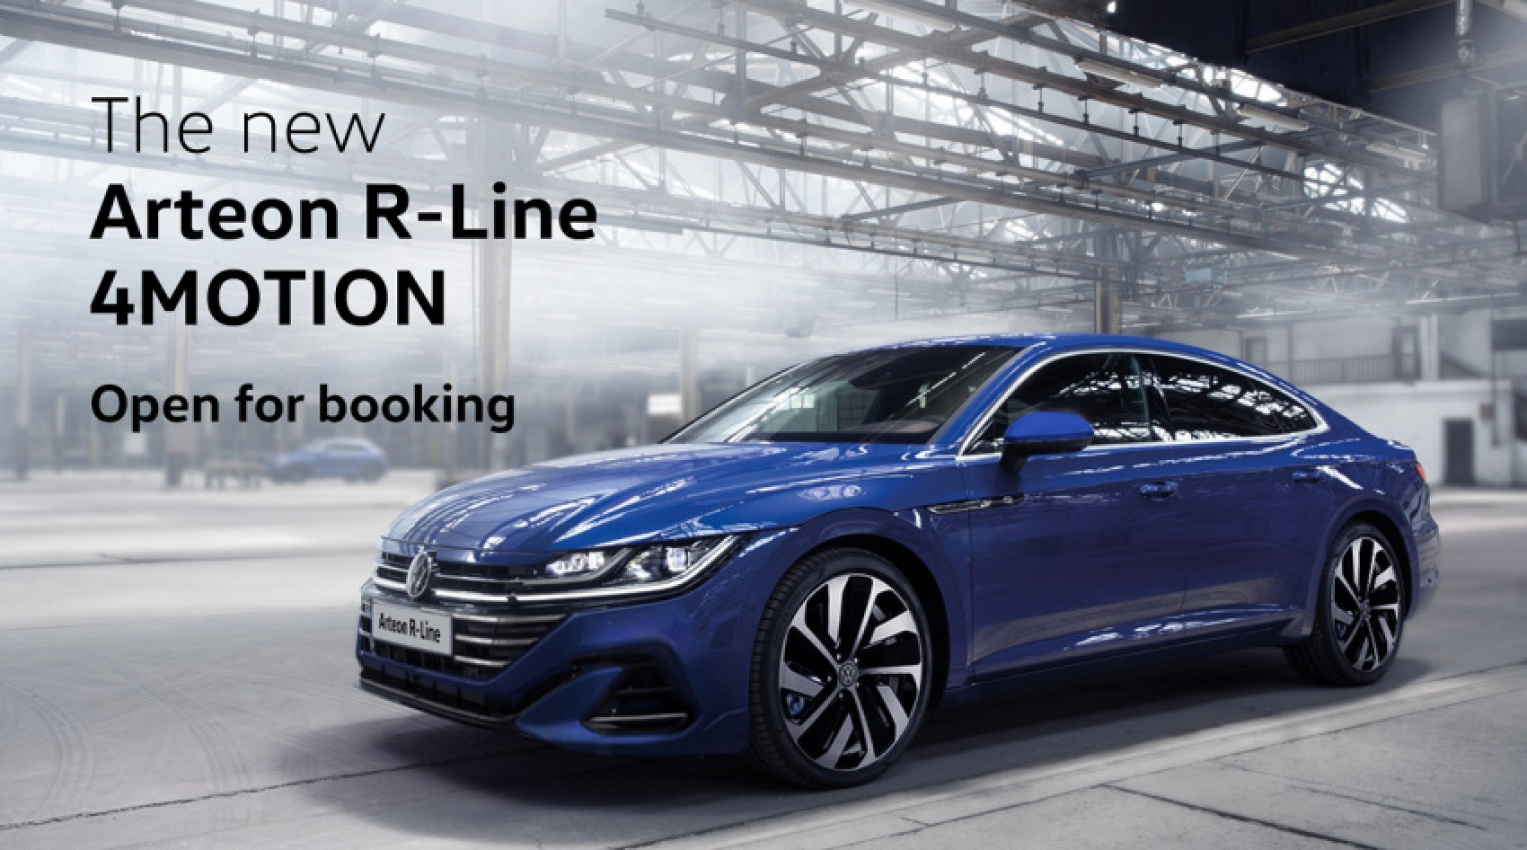 autos, car brands, cars, volkswagen, android, automotive, cars, malaysia, sedan, volkswagen passenger cars malaysia, vpcm, android, volkswagen arteon r-line 4motion now open for booking in malaysia